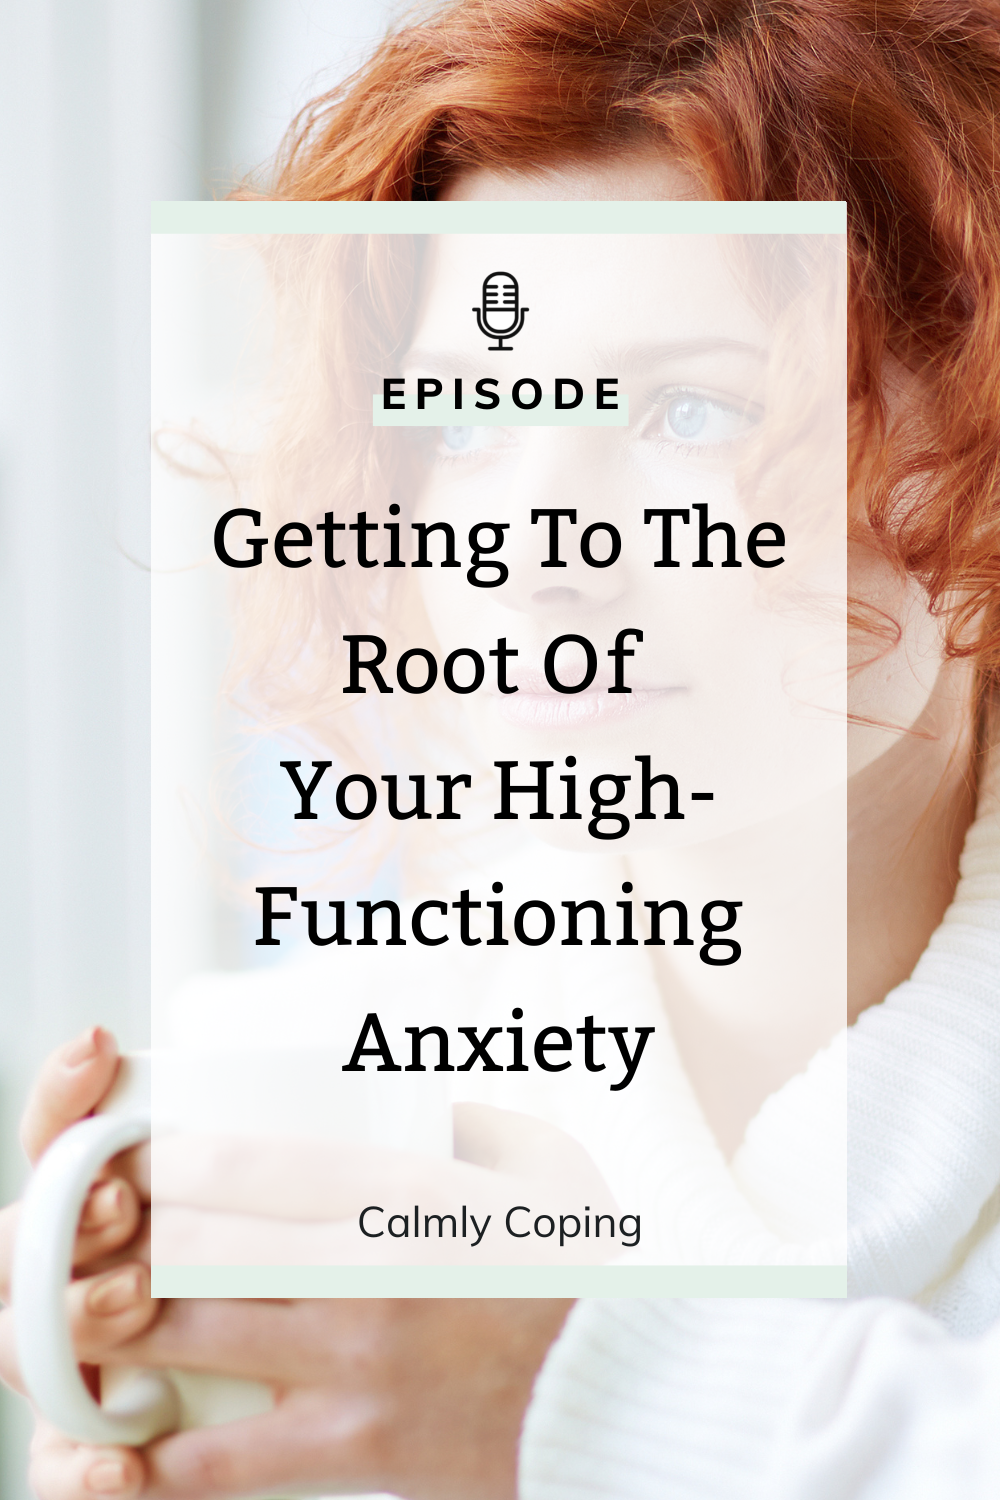 Getting To The Root Of Your High-Functioning Anxiety